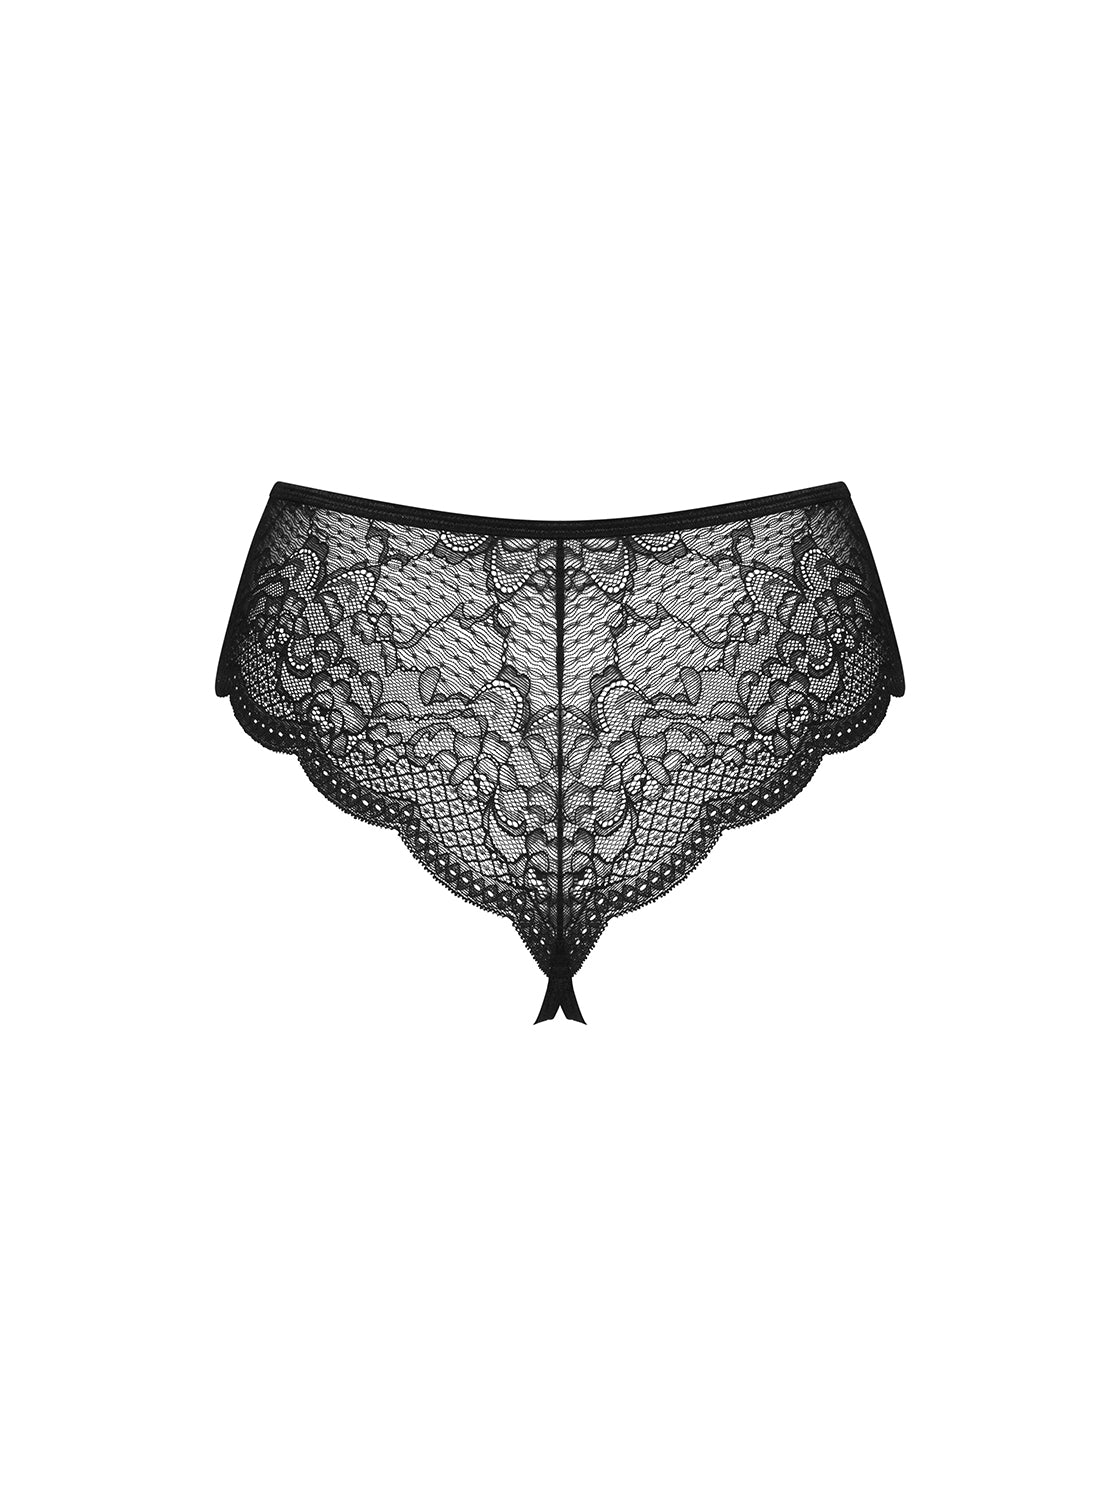 Pearlove a high-cut panty, shiny jewelry details, elegant pearls on the front and open crotch